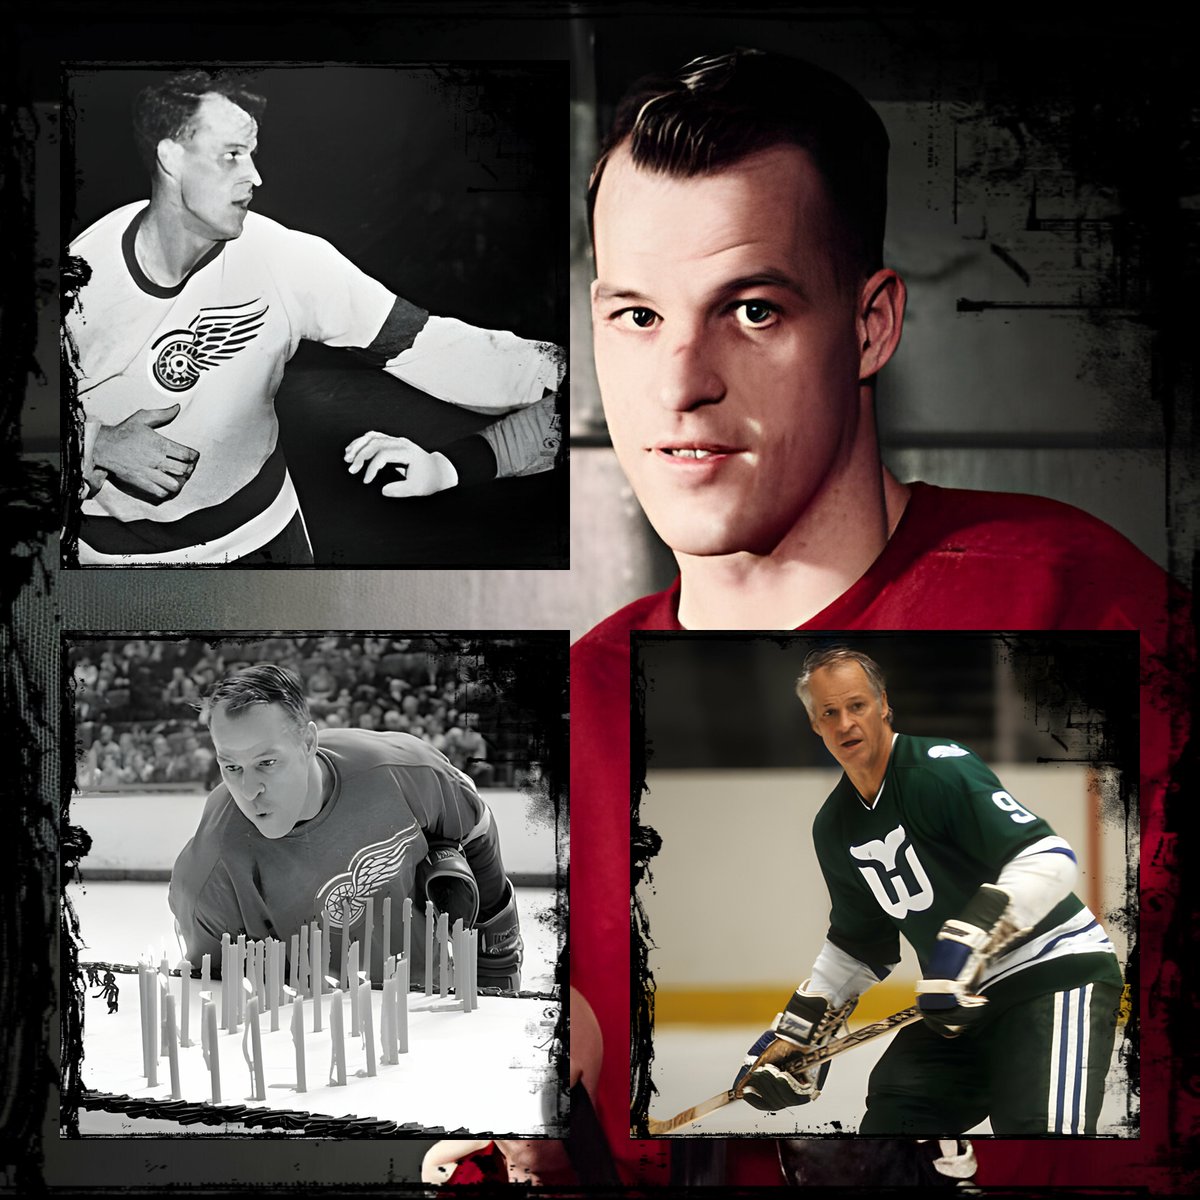 Happy Birthday to the late, great Gordie Howe who played from 1946-1980 with Detroit, Houston, New England, & Hartford. 03.31.24 #HFH #HOF